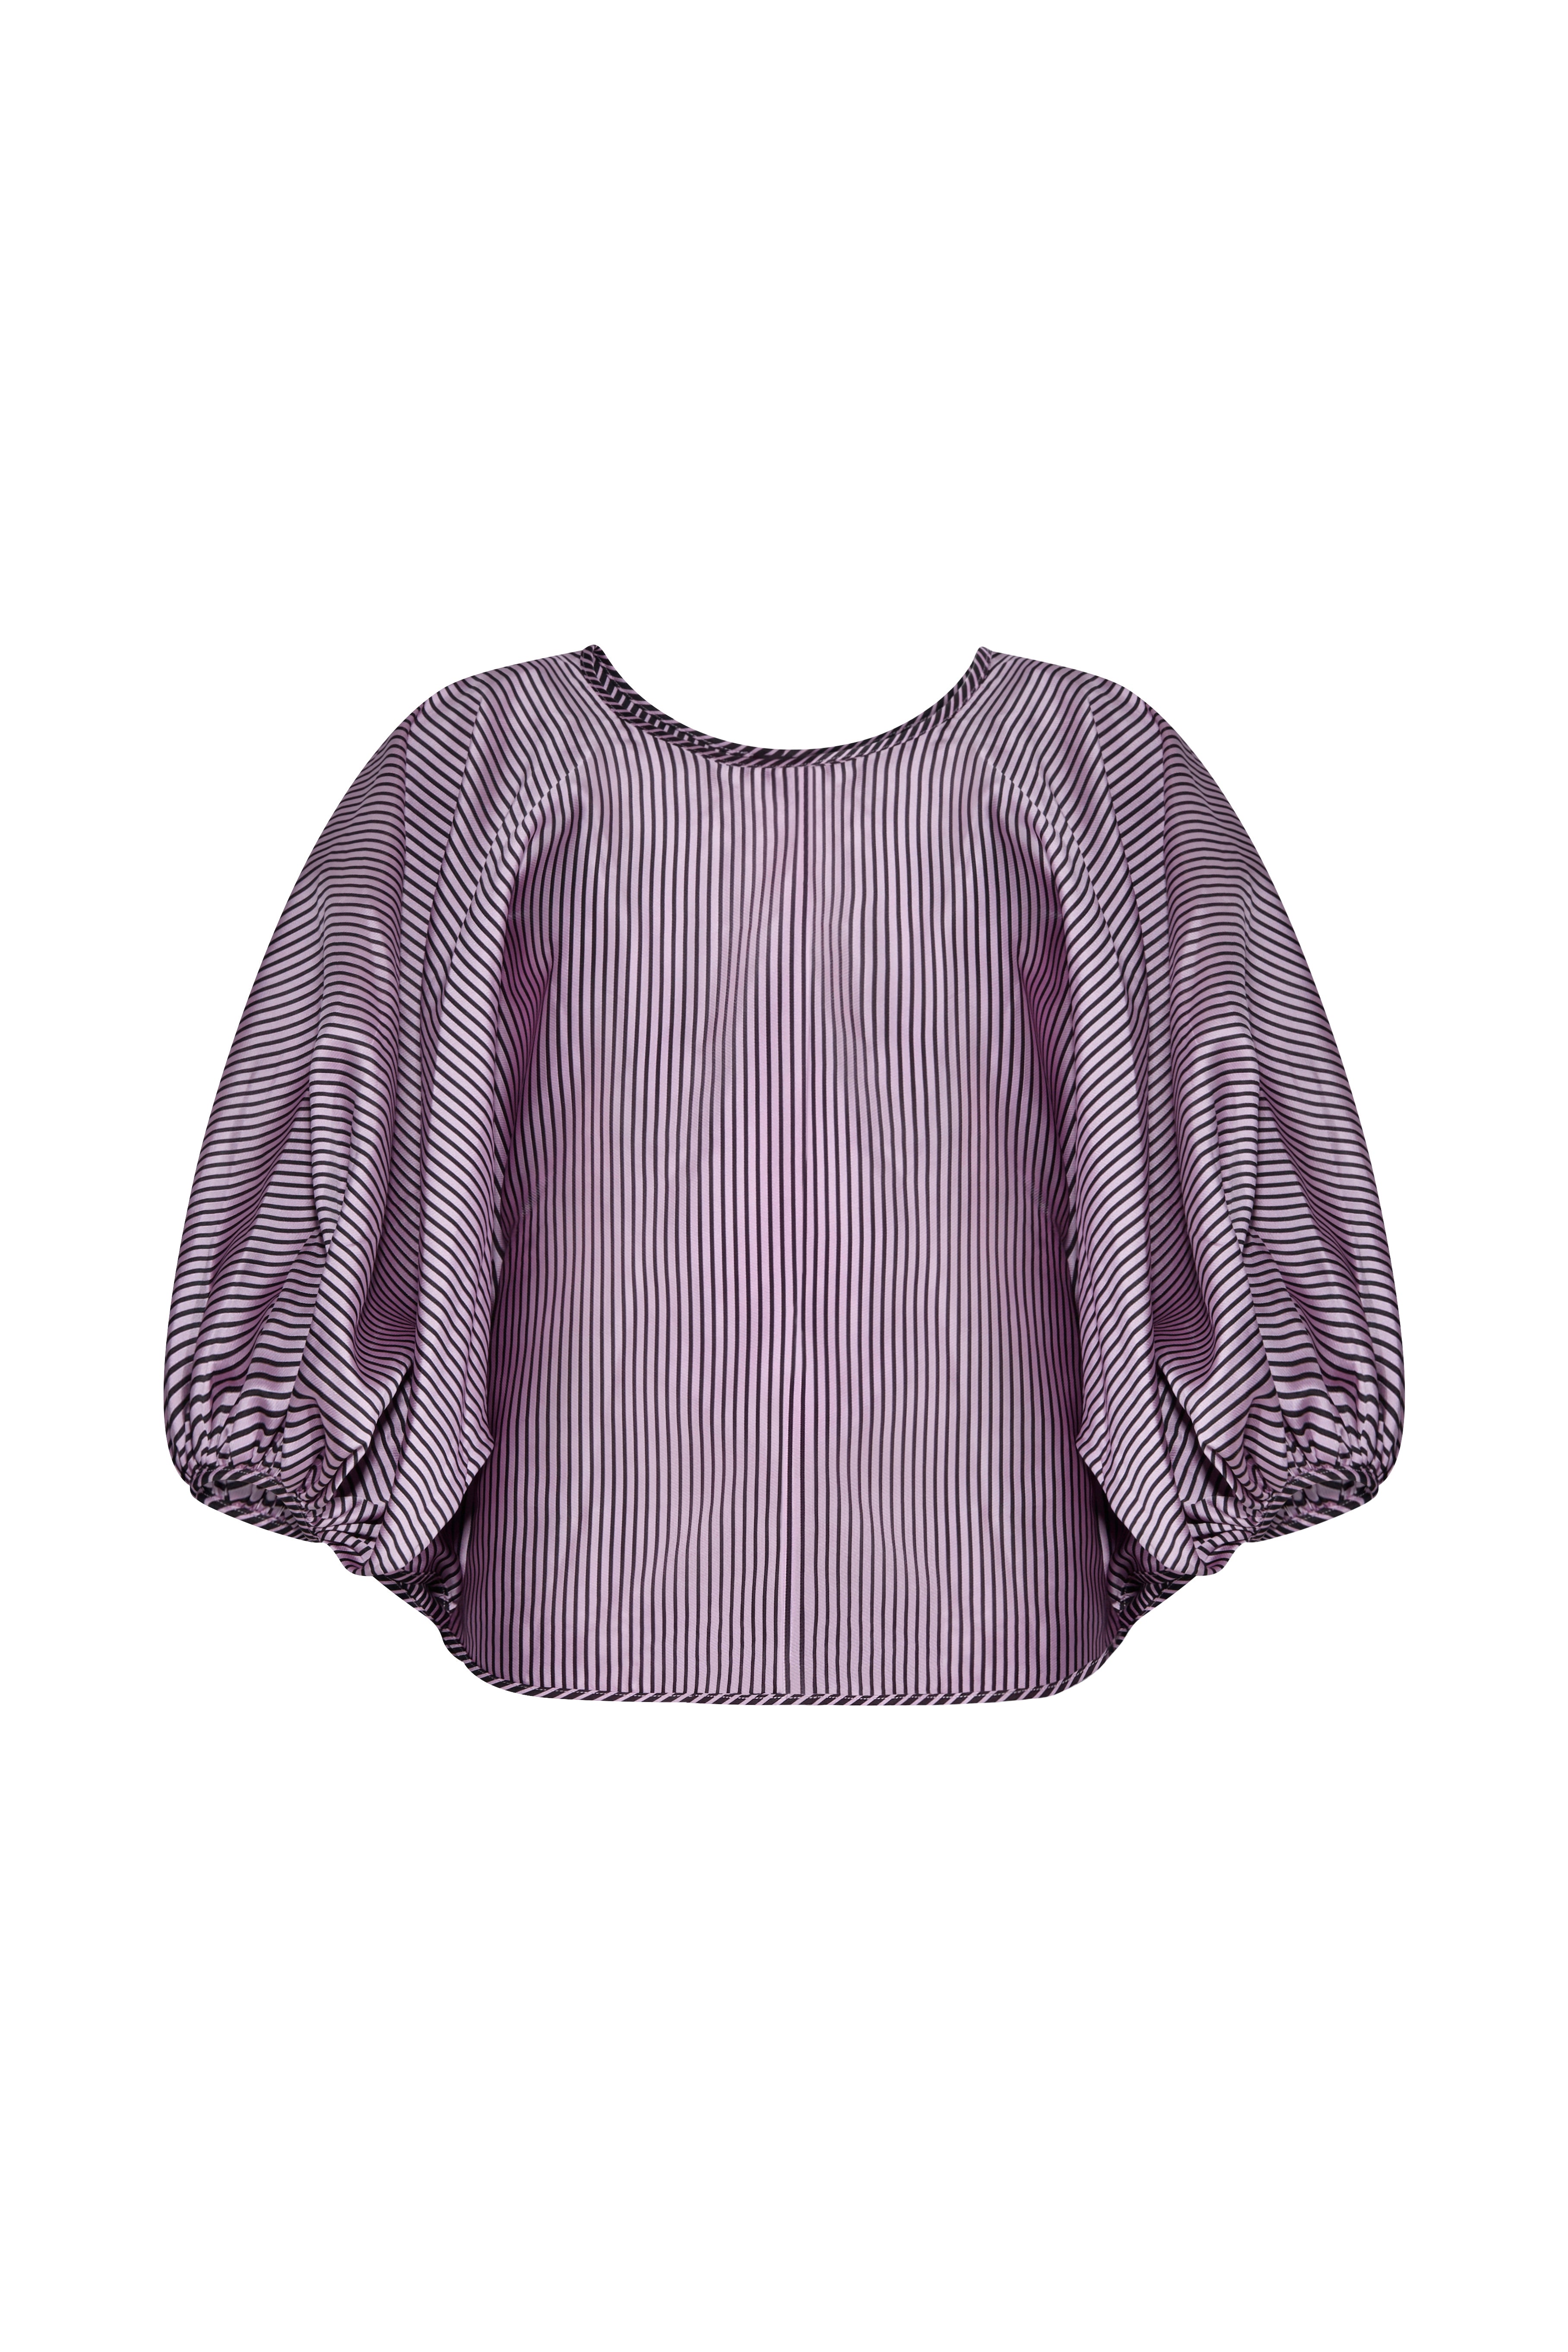 Purple and Black Striped Party Blouse - Arianne Elmy